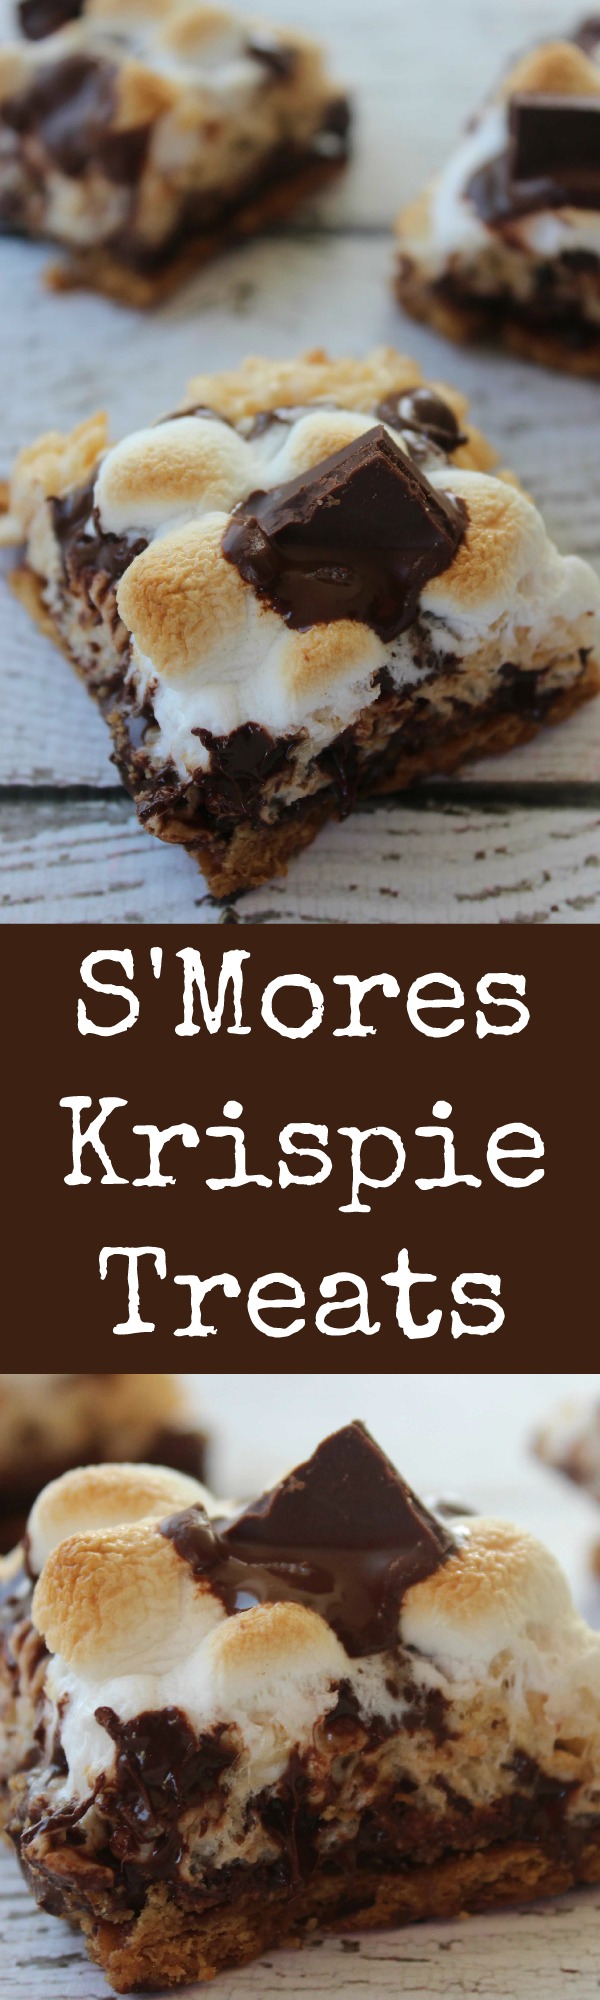 These S’Mores Krispie Treats combines your favorite Rice Krispie Treats cereal with the taste of your favorite classic S’mores recipes for a yummy summertime treat that you and your family are sure to love. Delicious dessert bars full of chocolate that will surely be a hit at your next party!